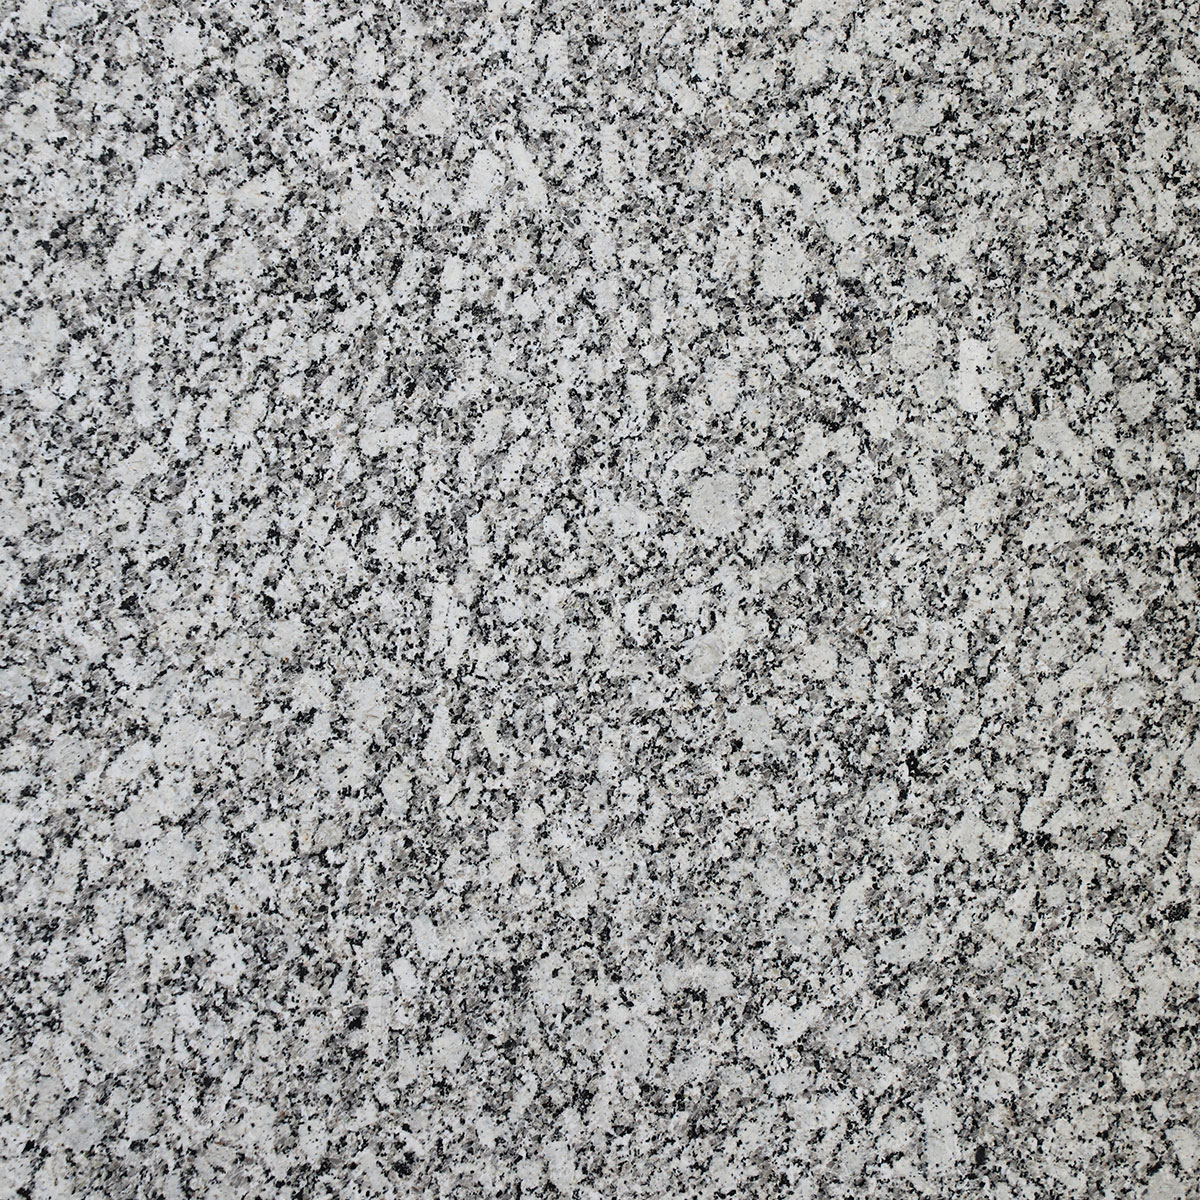 static/products/marbleSlabs/products/GW10.jpg 